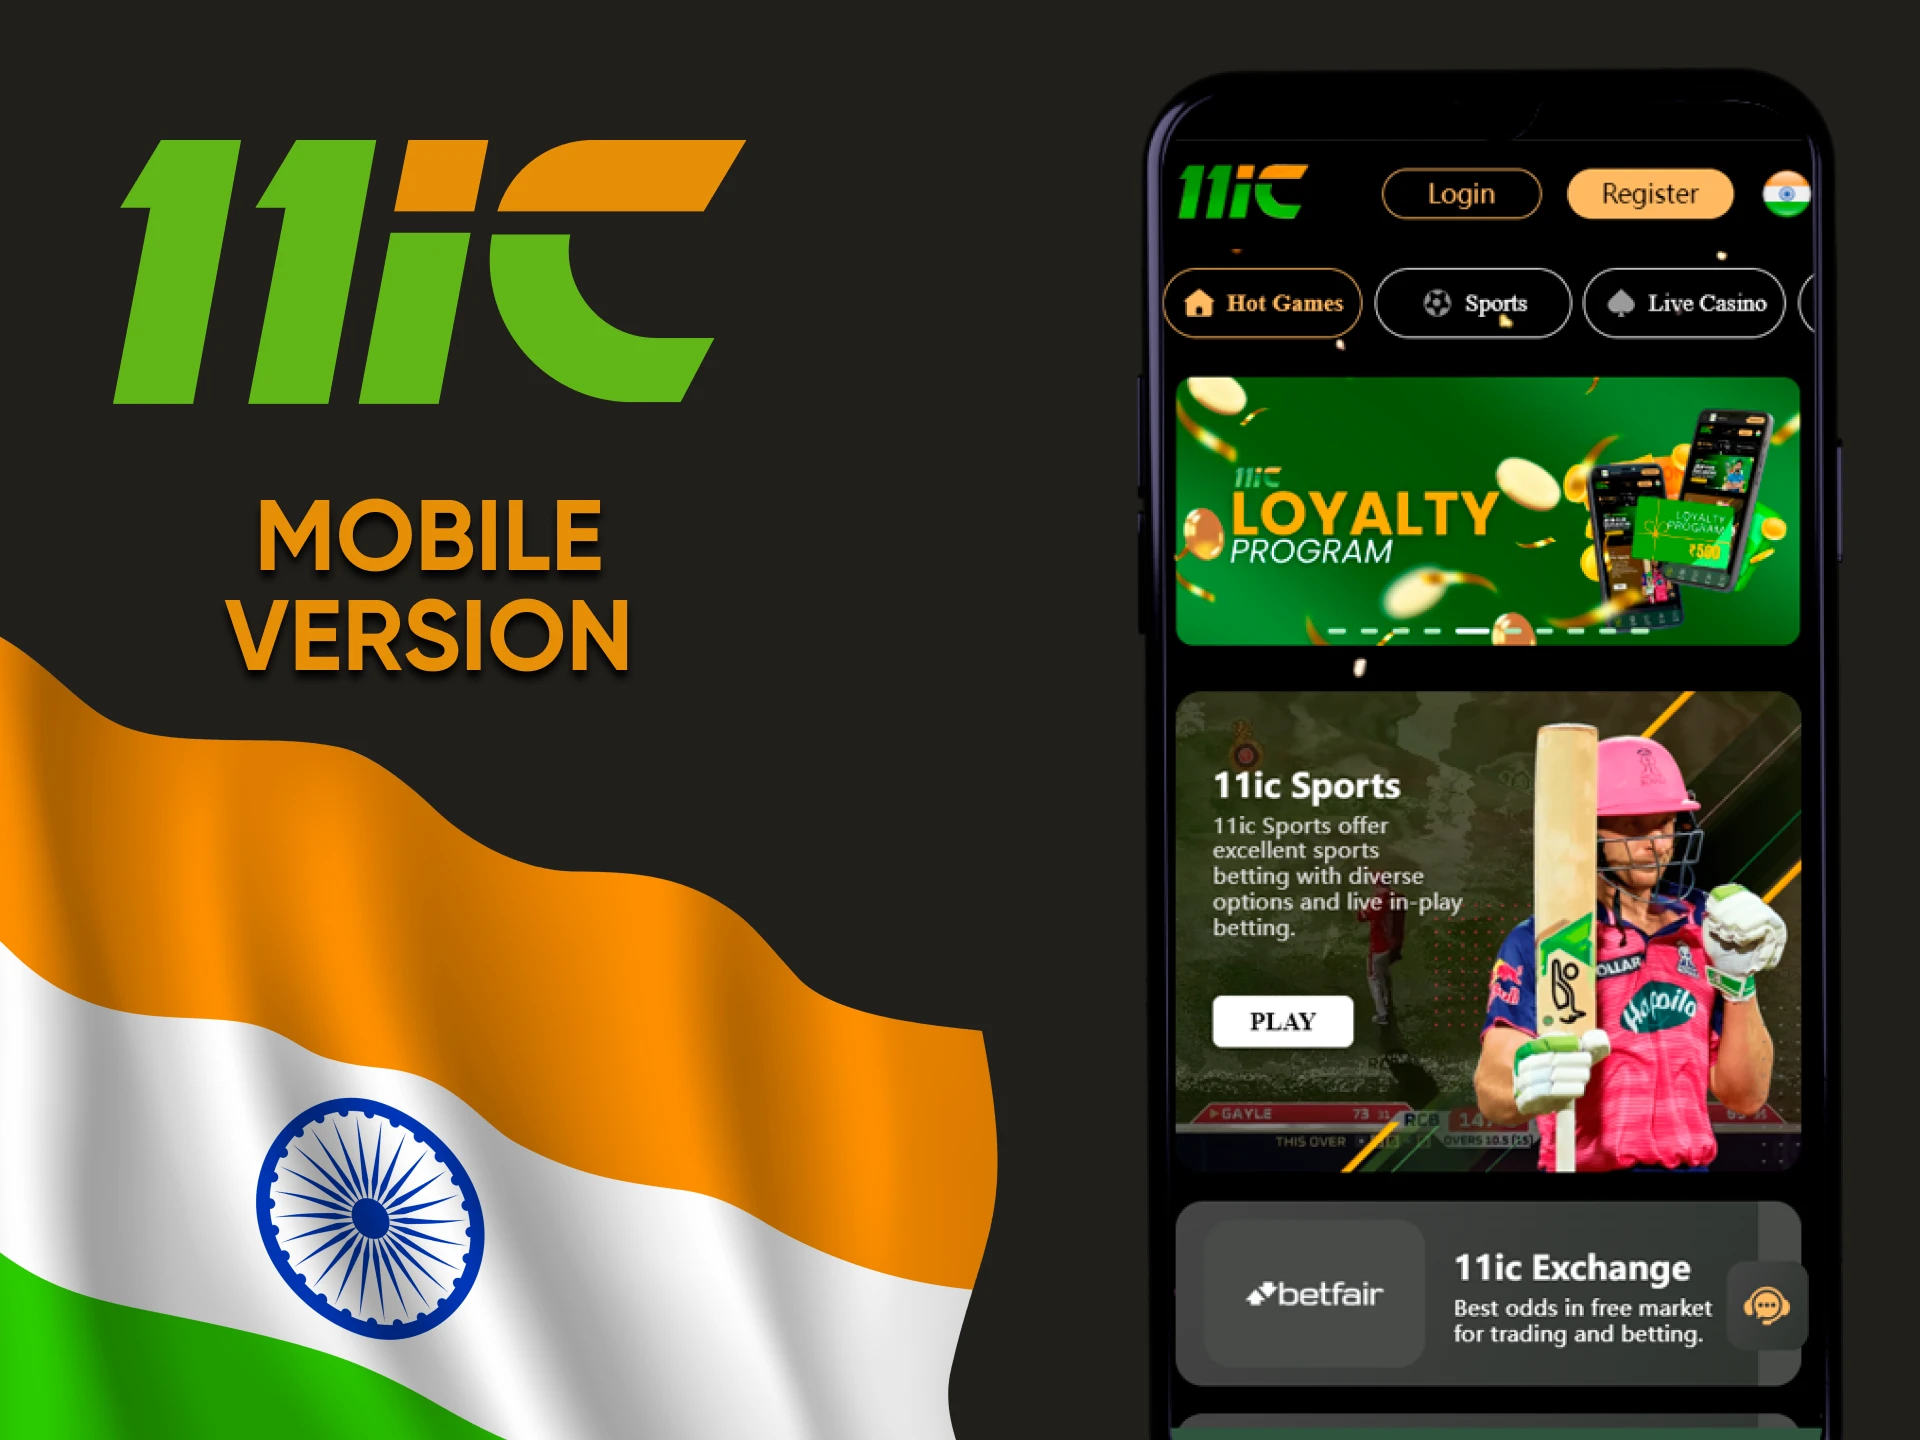 Visit the mobile version of the 11ic website.